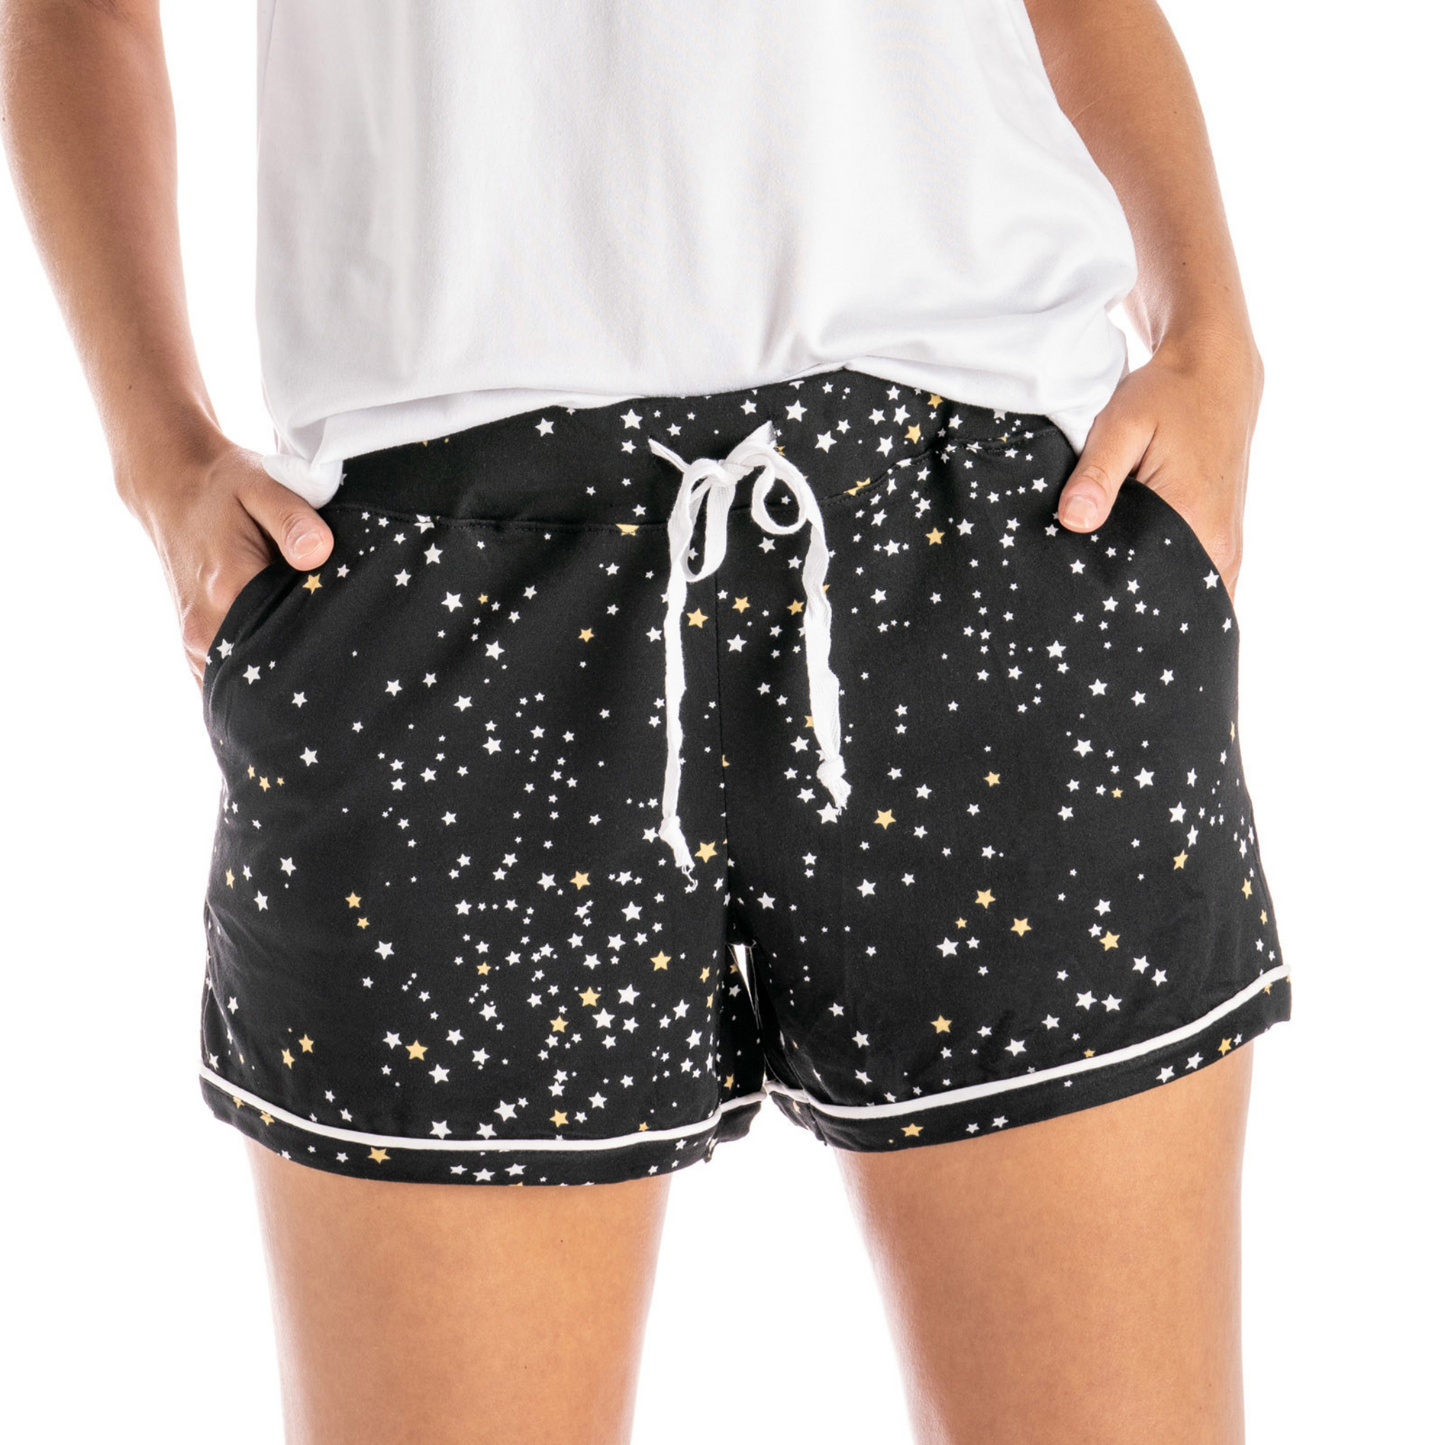 comfortable black  loungewear shorts  with stars printed on them